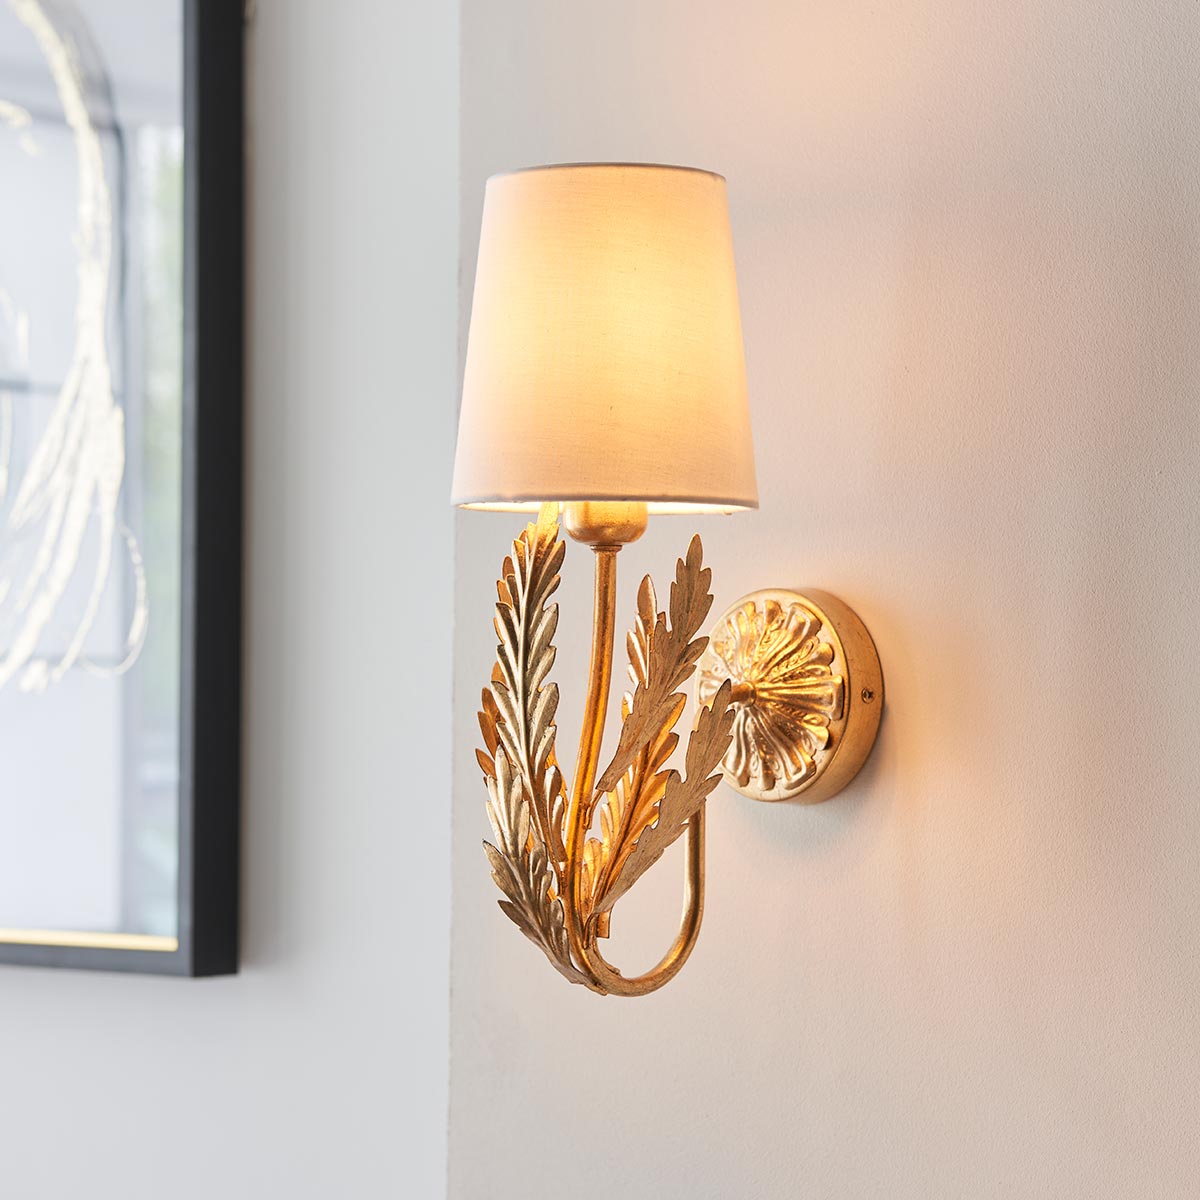 Endon Delphine Floral 1 Lamp Single Wall Light Gold Leaf Ivory Shade